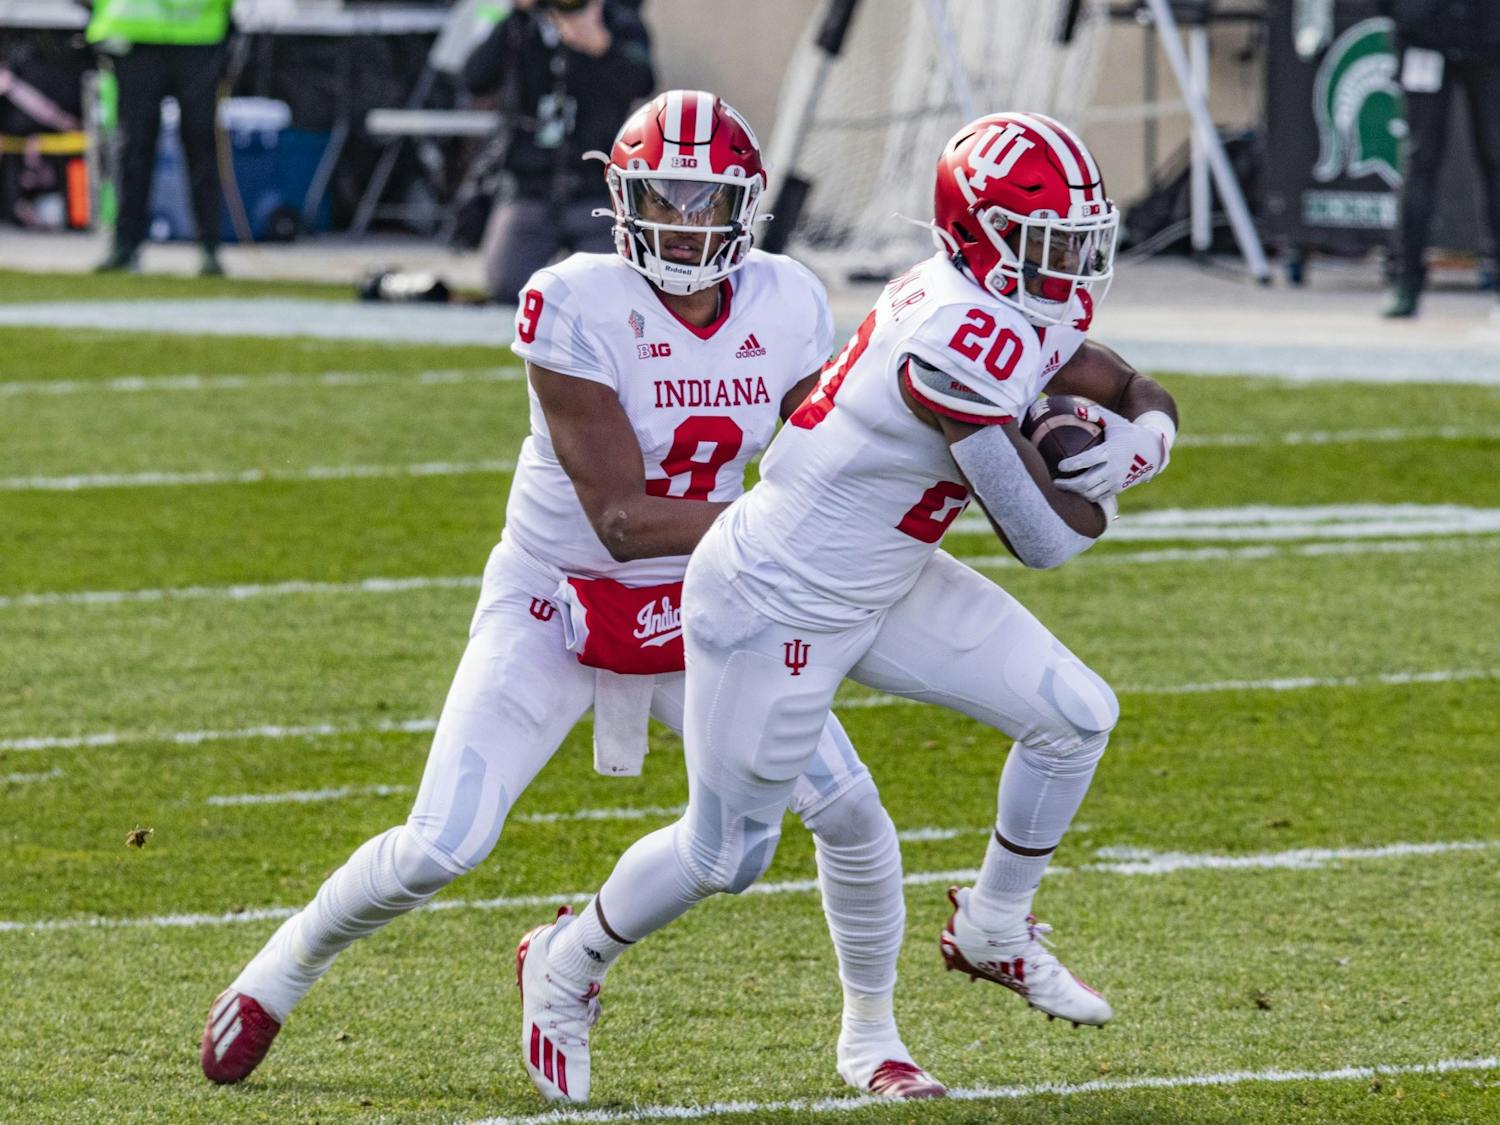 GALLERY: No. 10 IU wins Old Brass Spittoon, shuts out Michigan State